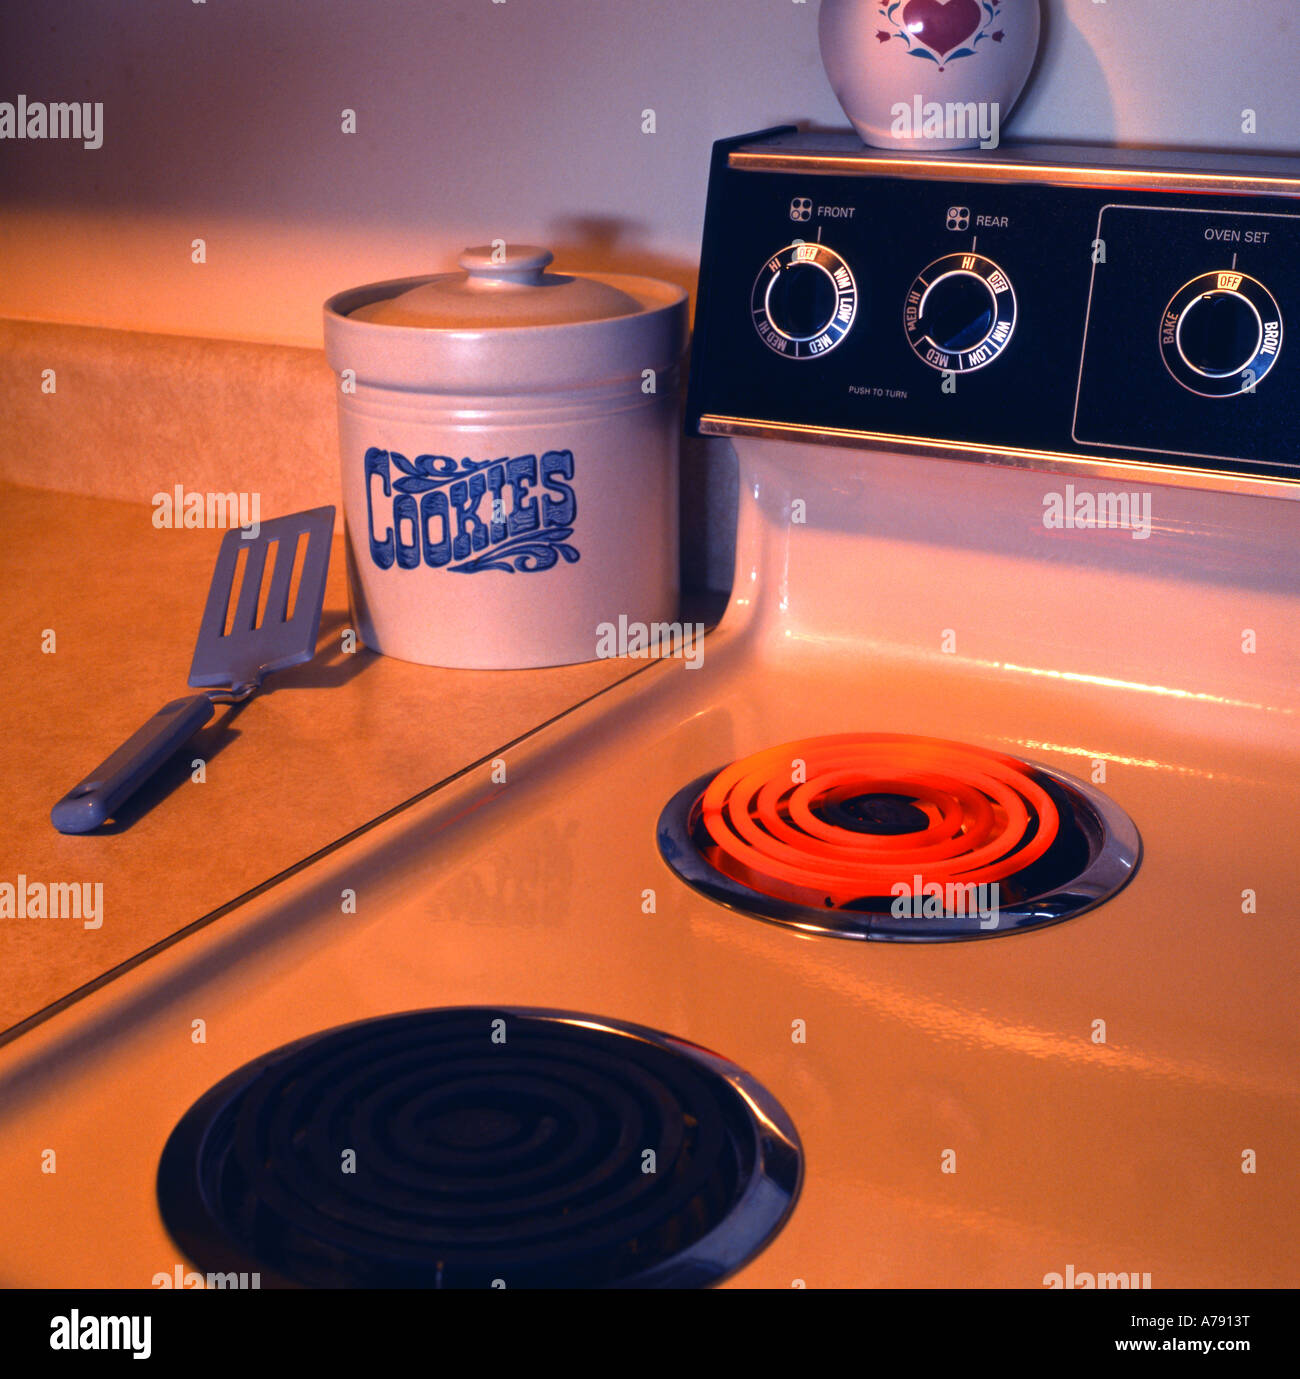 Electric stove top burner for cooking Stock Photo - Alamy